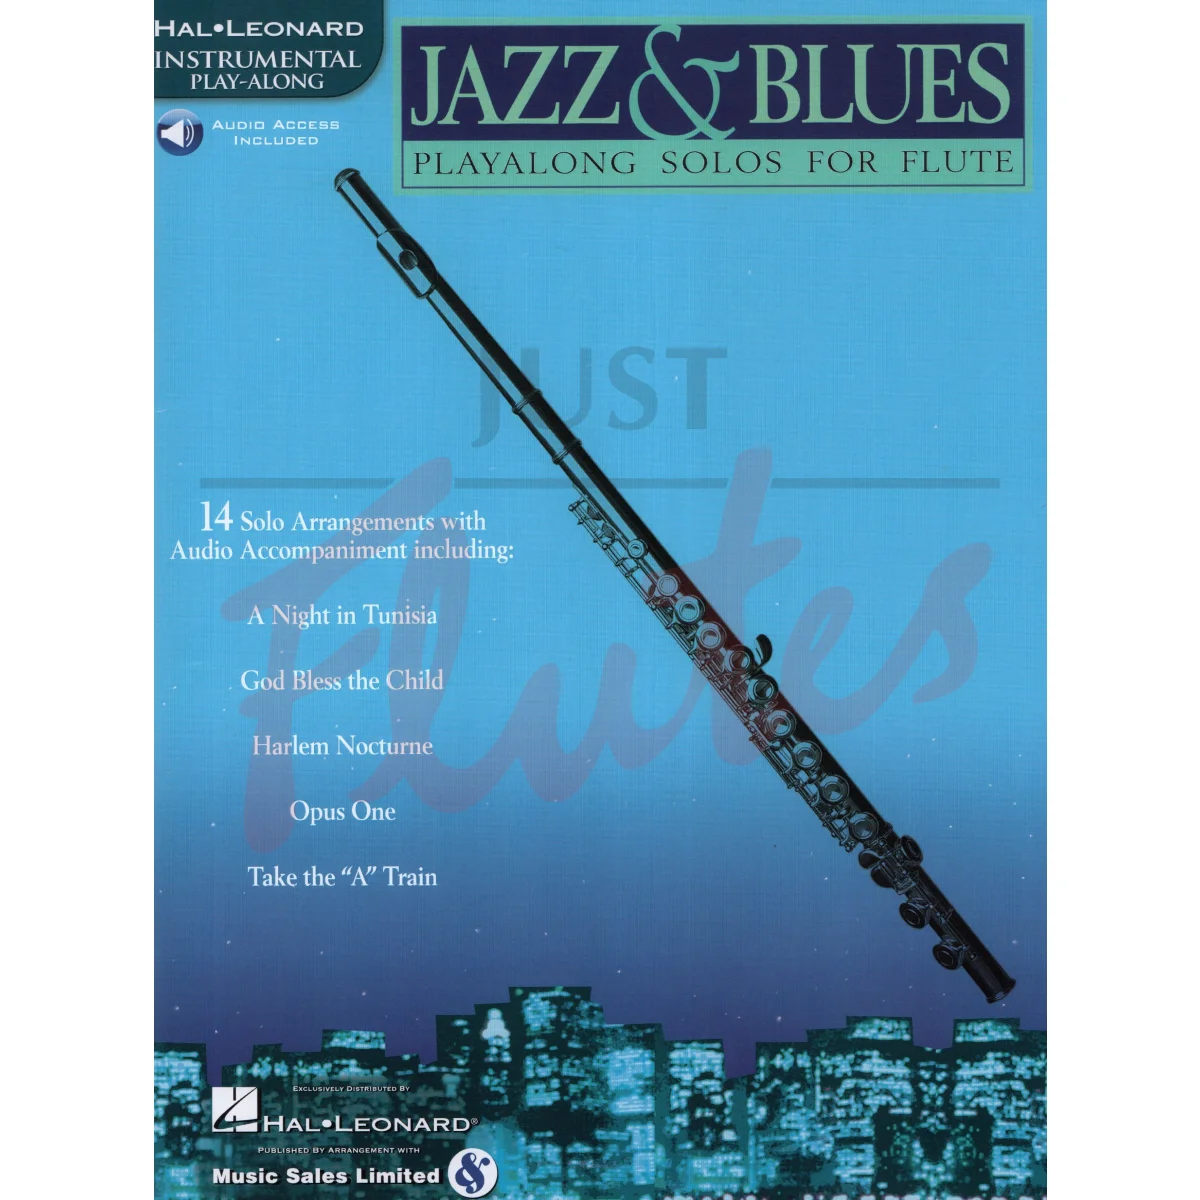 Jazz &amp; Blues Playalong Solos for Flute